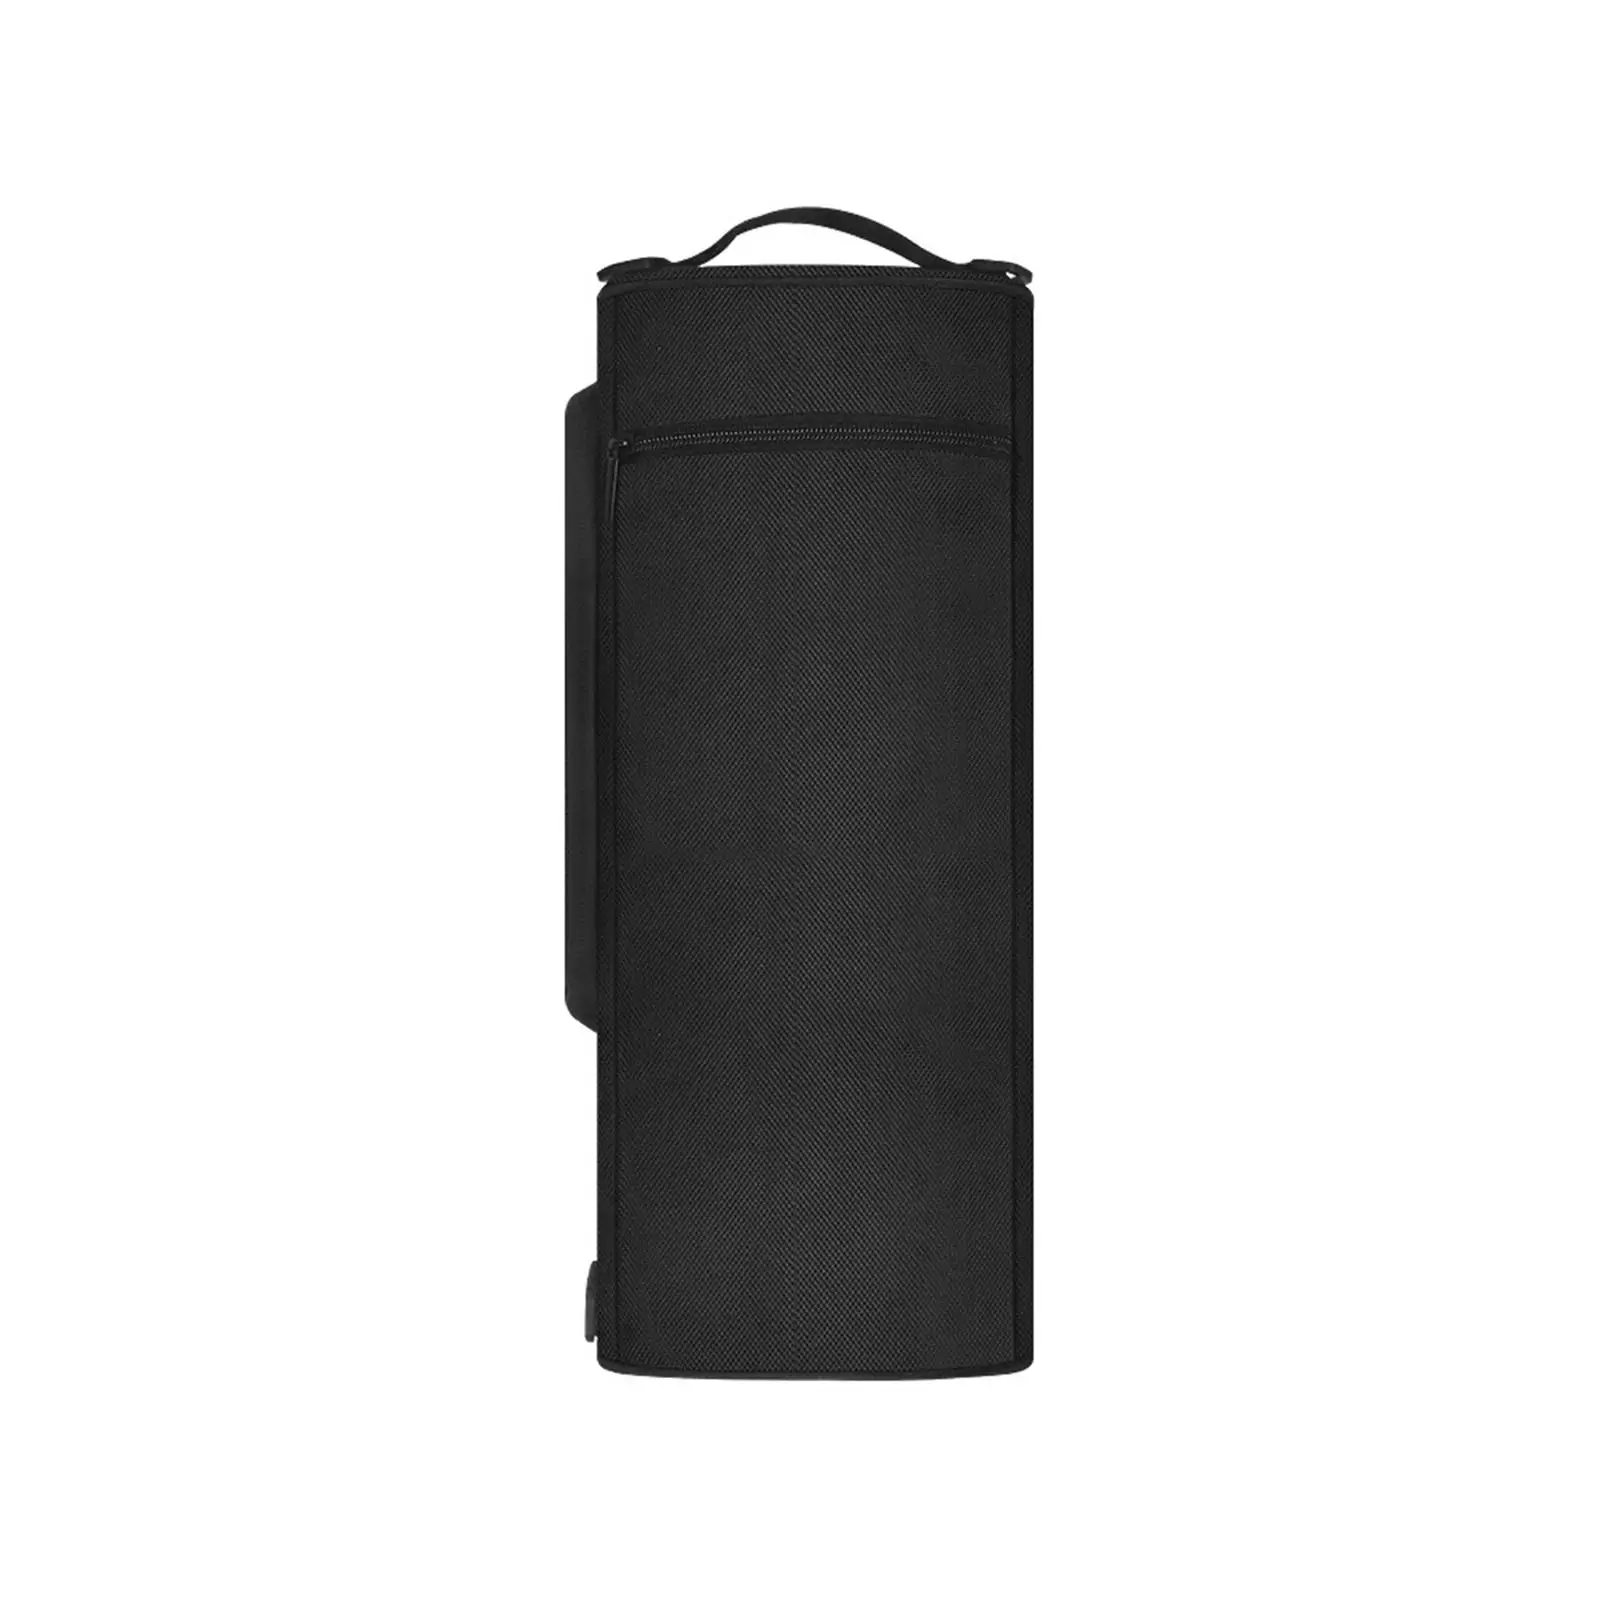 Golf Coolers Bag Holds Two Wine Bottles Soft Insulated Coolers Sleeve Insulated Coolers Bag Sleeve for Outdoor Picnic Camping